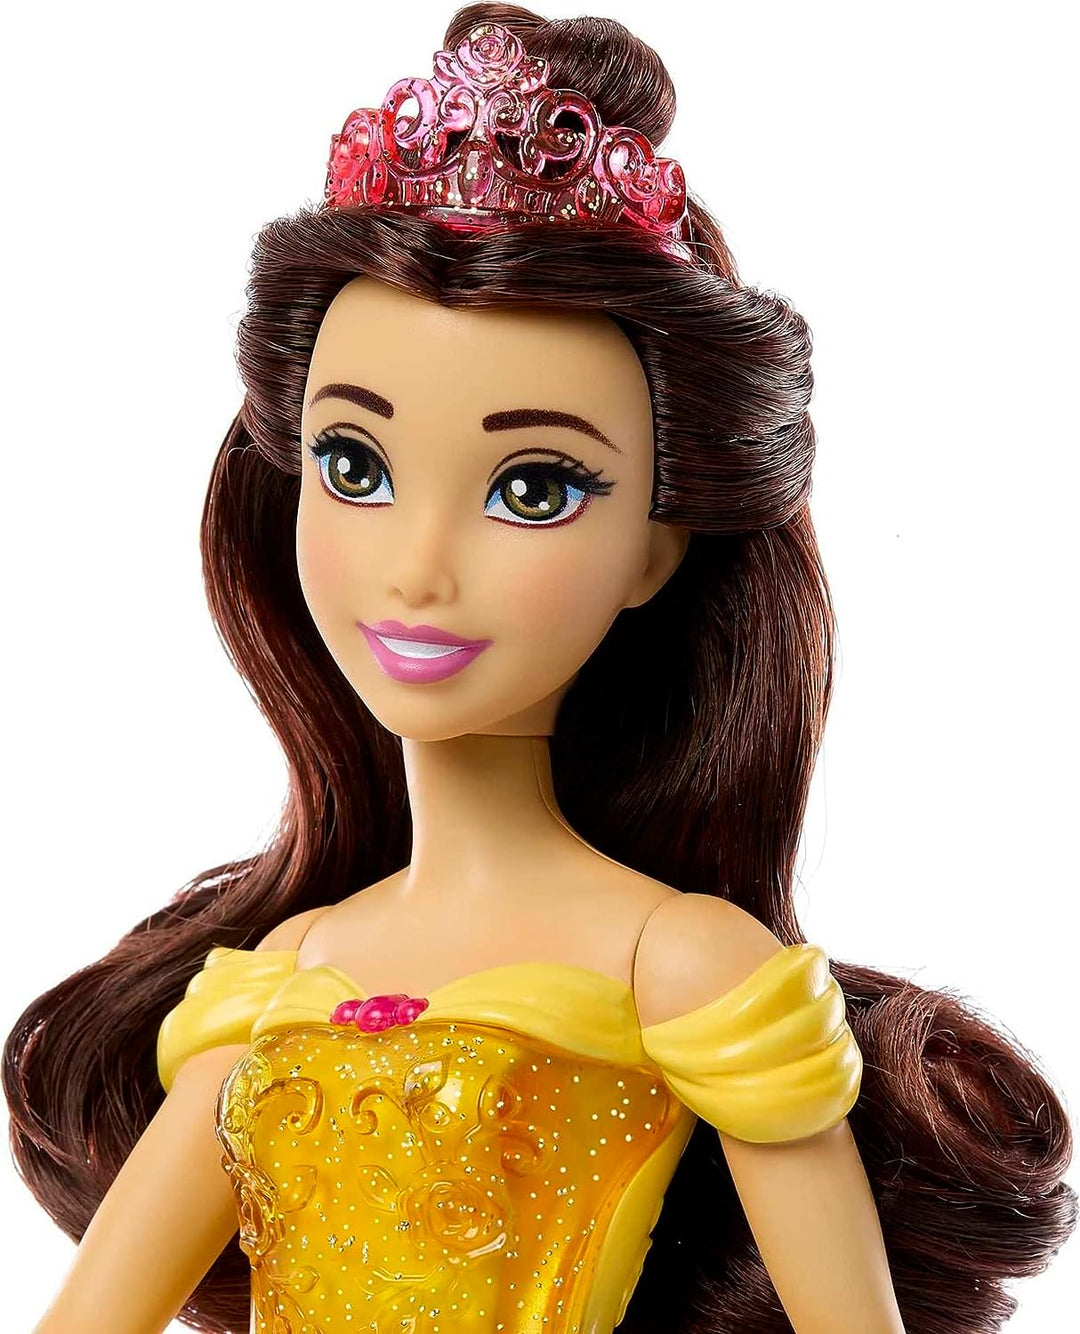 Disney Princess Toys, Belle Posable Fashion Doll with Sparkling Clothing and Accessories